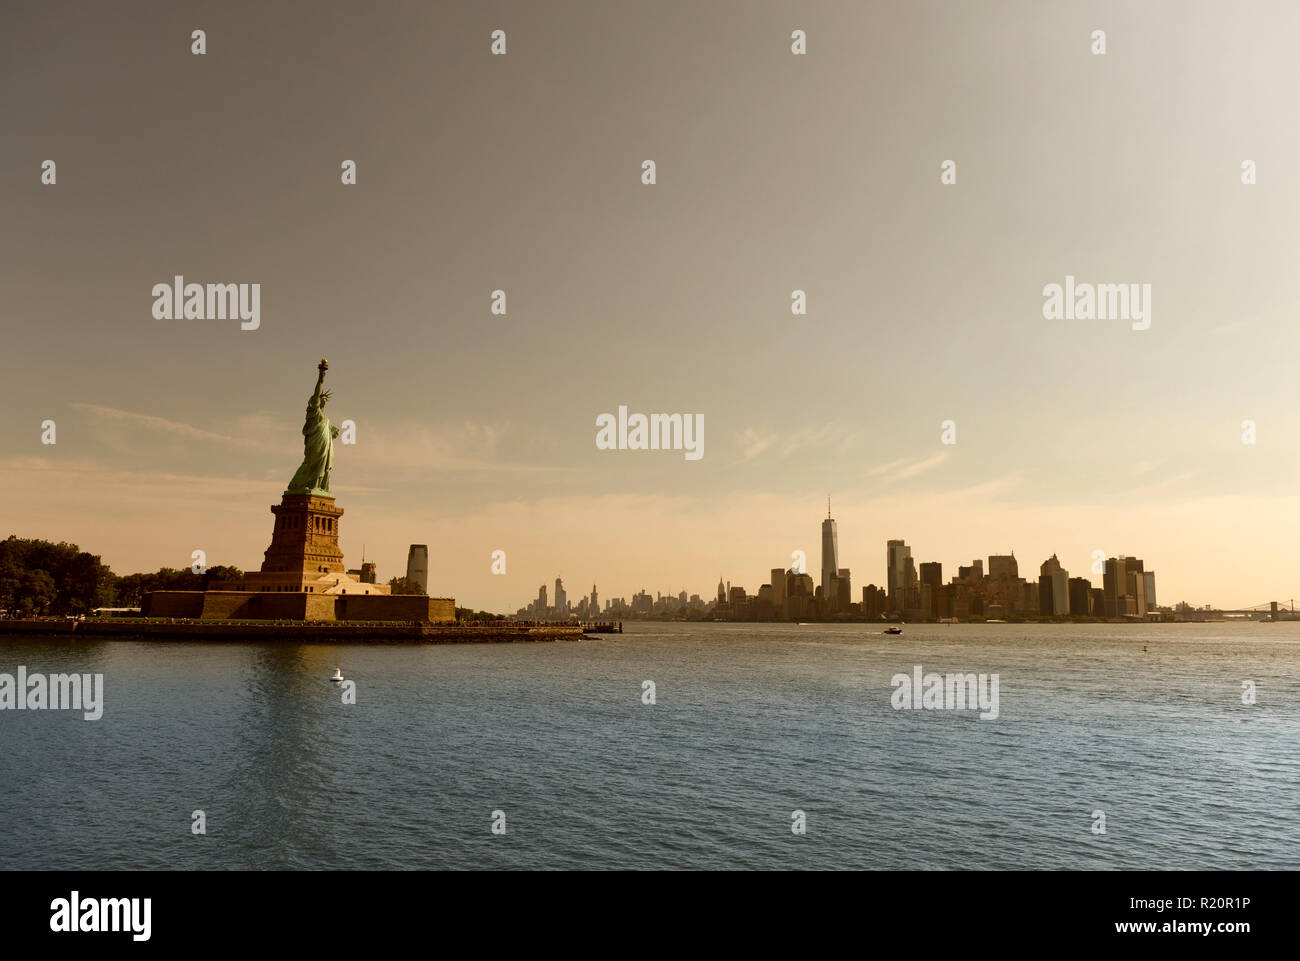 Statue of Liberty and financial district in lower Manhattan, New York City, NY, USA. Stock Photo